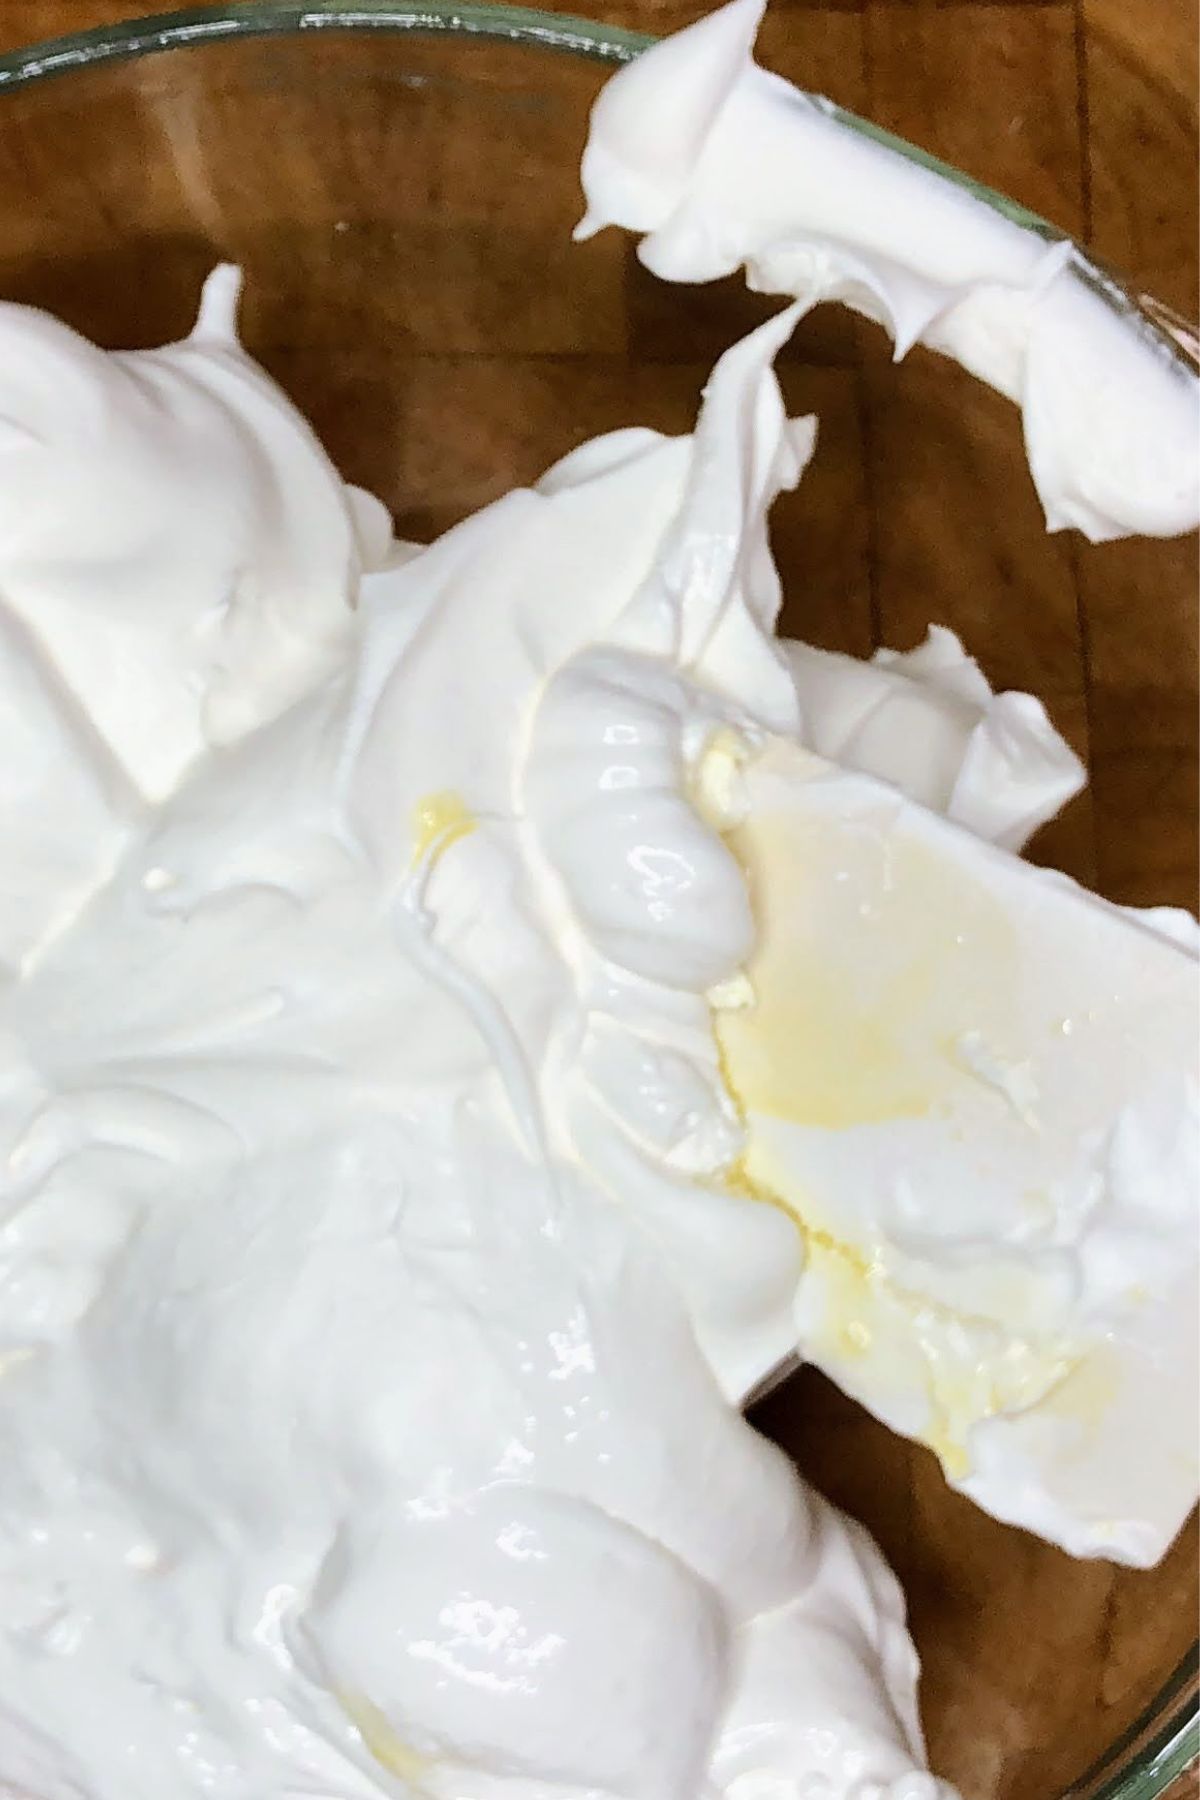 Folding marshmallow fluff into whipped topping.